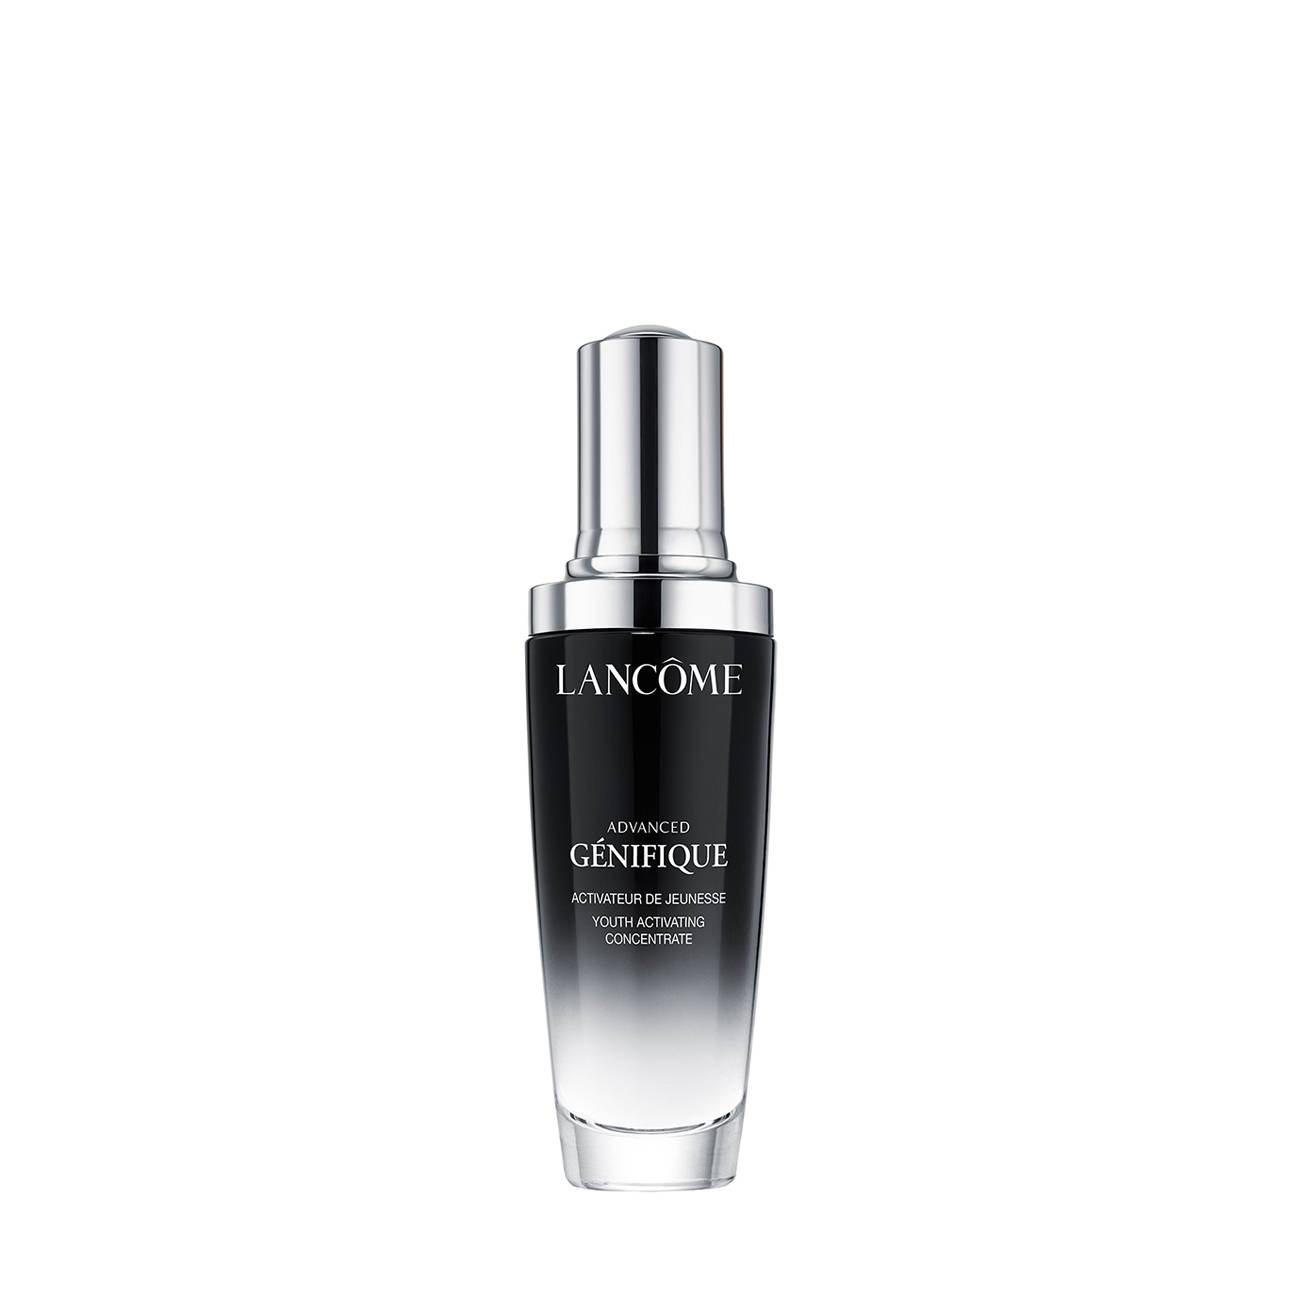 ADVANCED GENIFIQUE YOUTH ACTIVATING CONCENTRATE 50 ml ACTIVATING